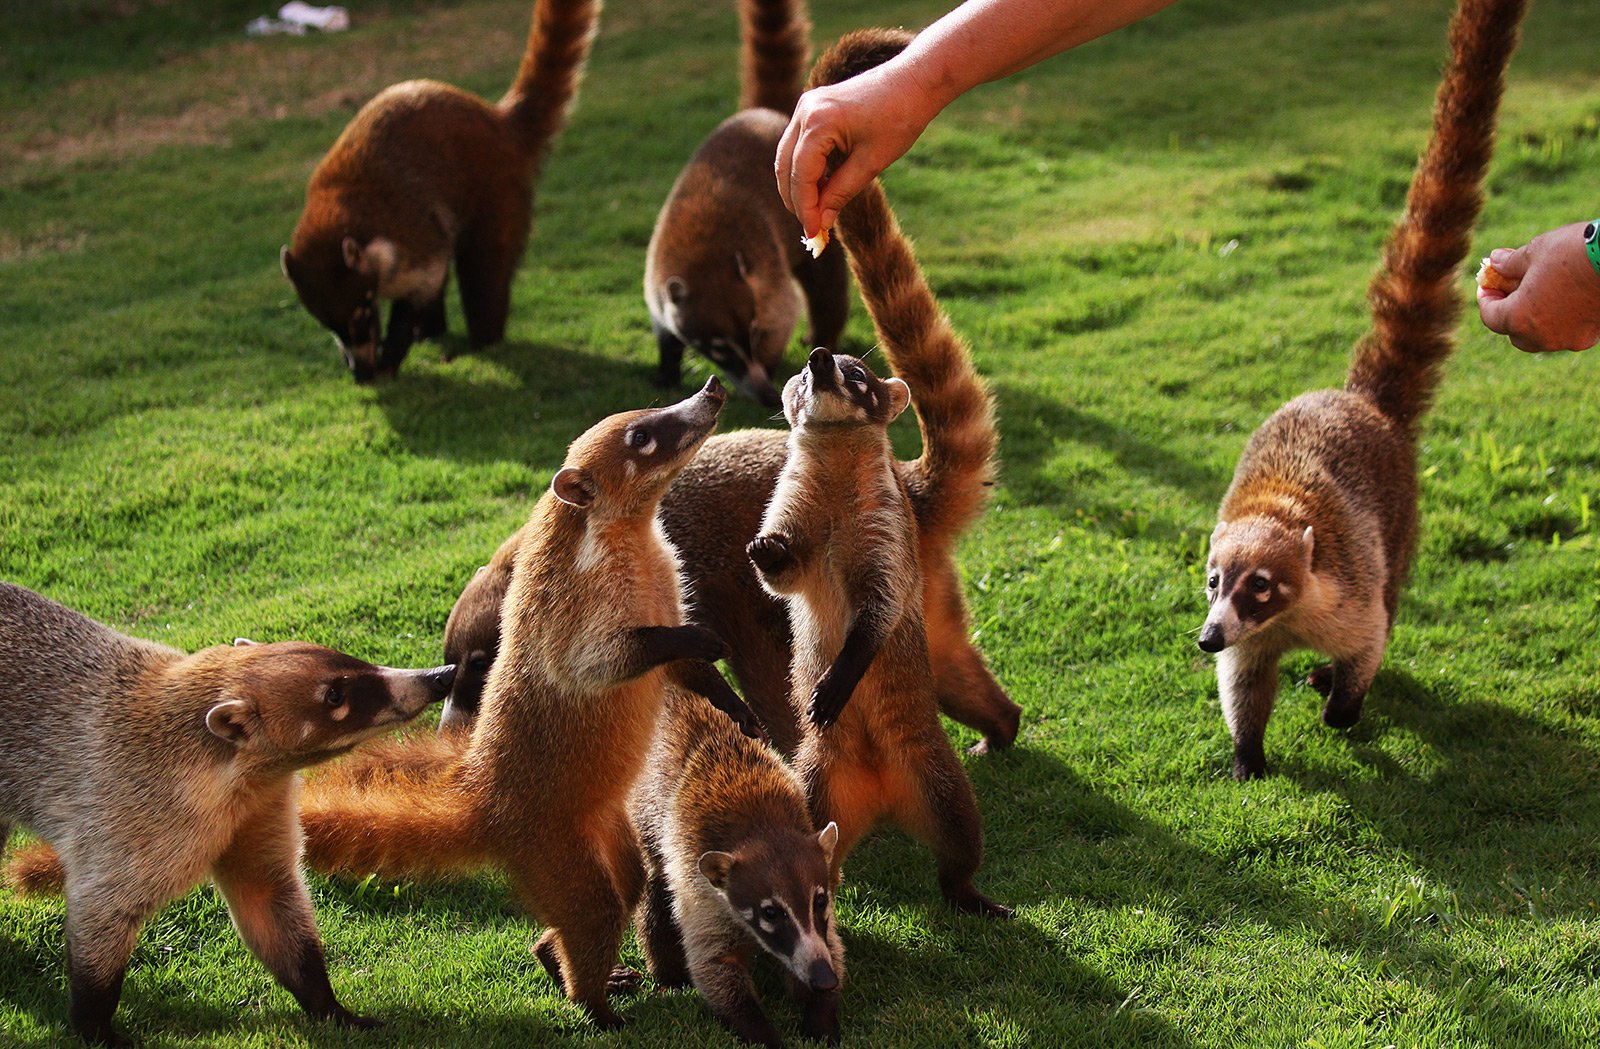 How to feed coatis in Cancun